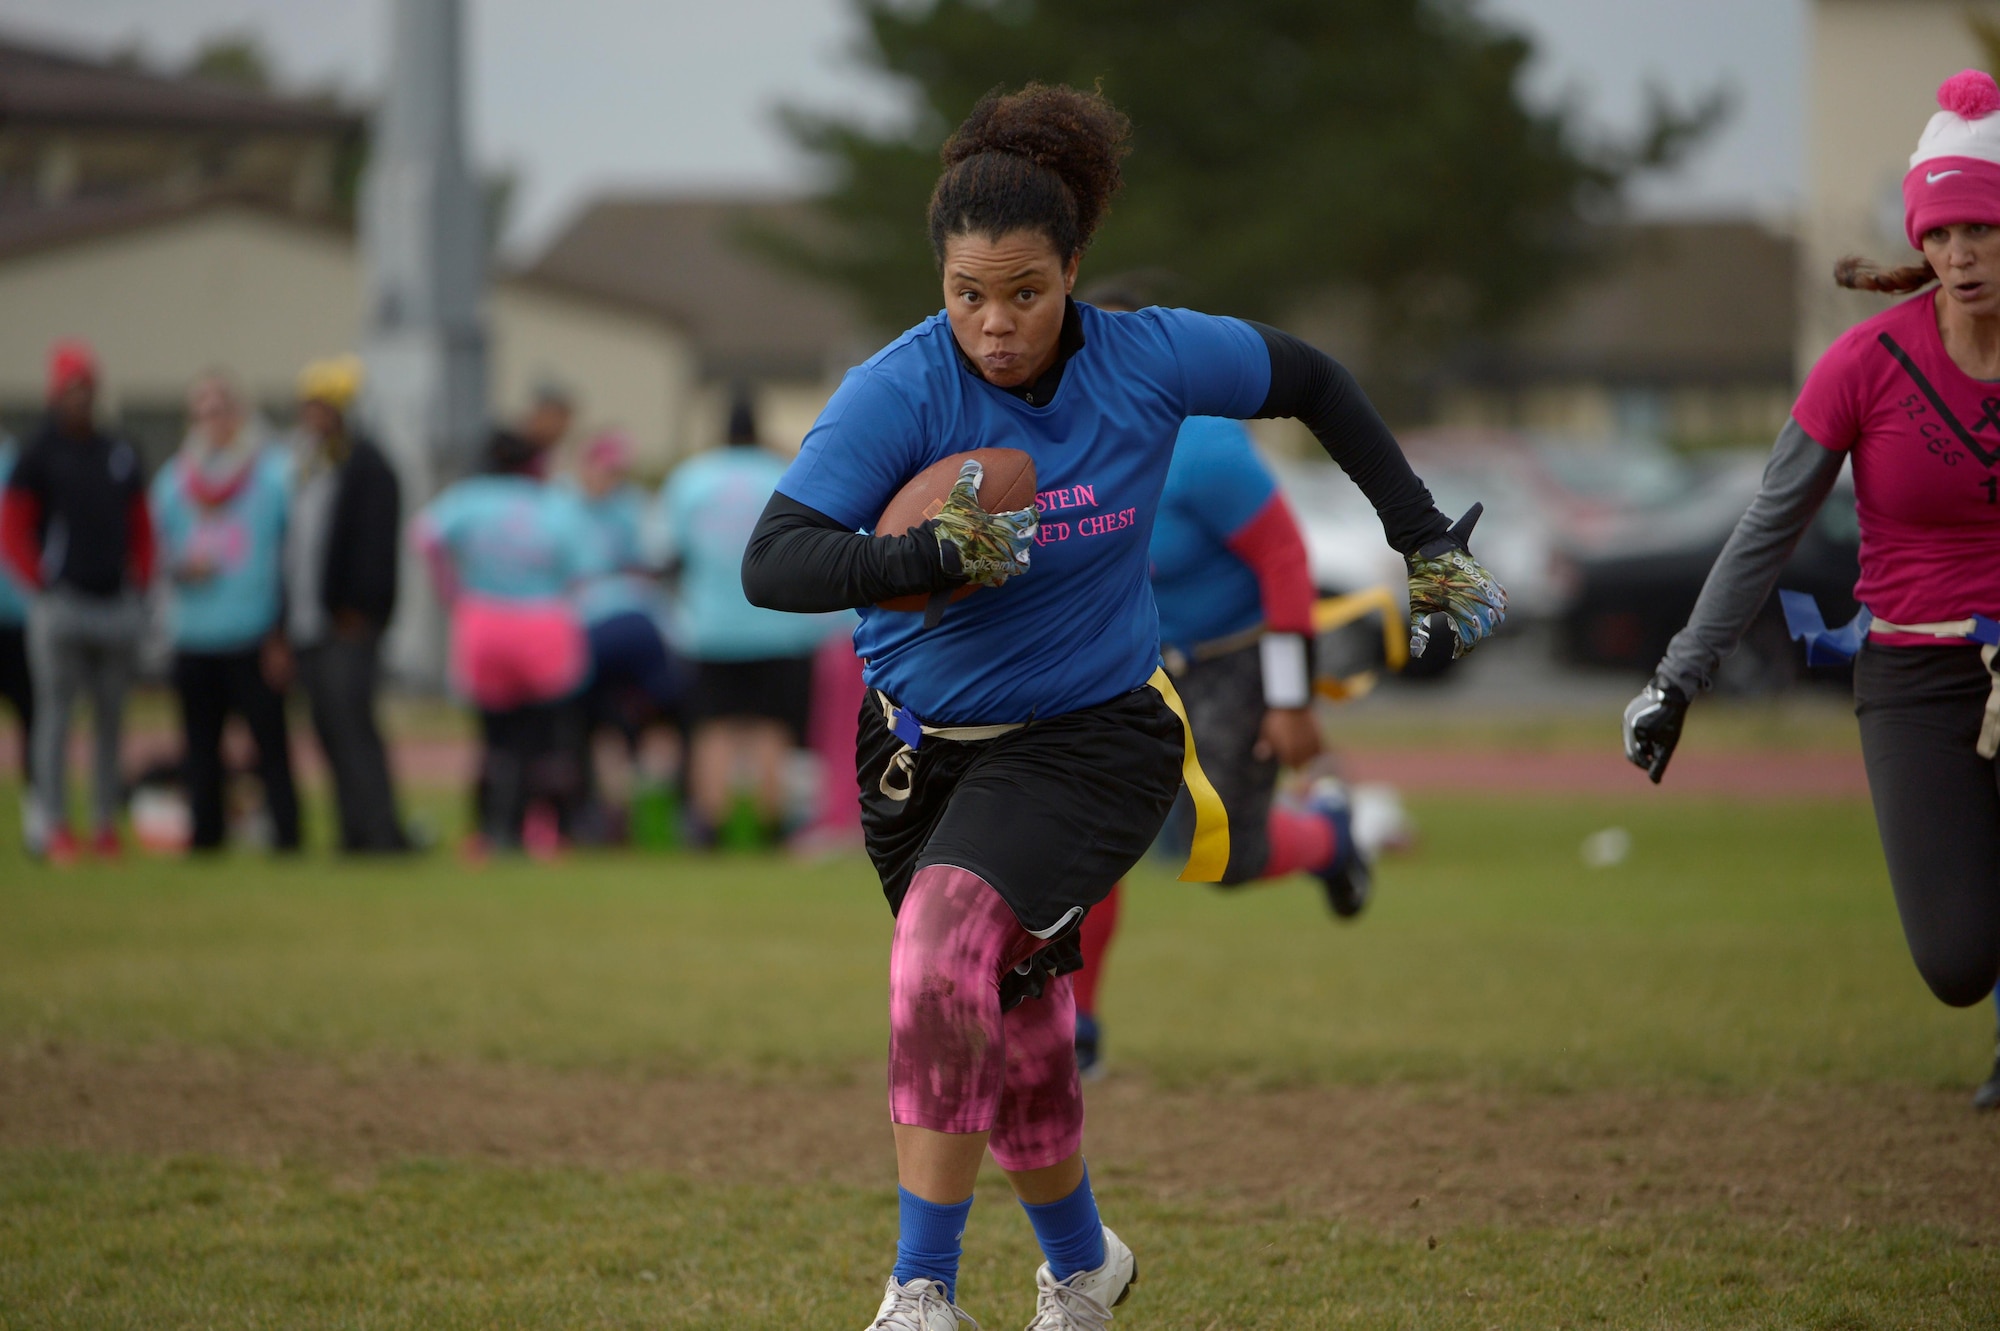 Airmen and family members from the 52nd Fighter Wing participated in a flag football game at the 2016 Combined Federal Campaign-Overseas kickoff Oct. 15, 2016, at Spangdahlem Air Base, Germany. CFC has more than 200 campaigns throughout the world to help to raise millions of dollars for eligible non-profit organizations each year. (U.S. Air Force photo by Staff Sgt. Jonathan Snyder)